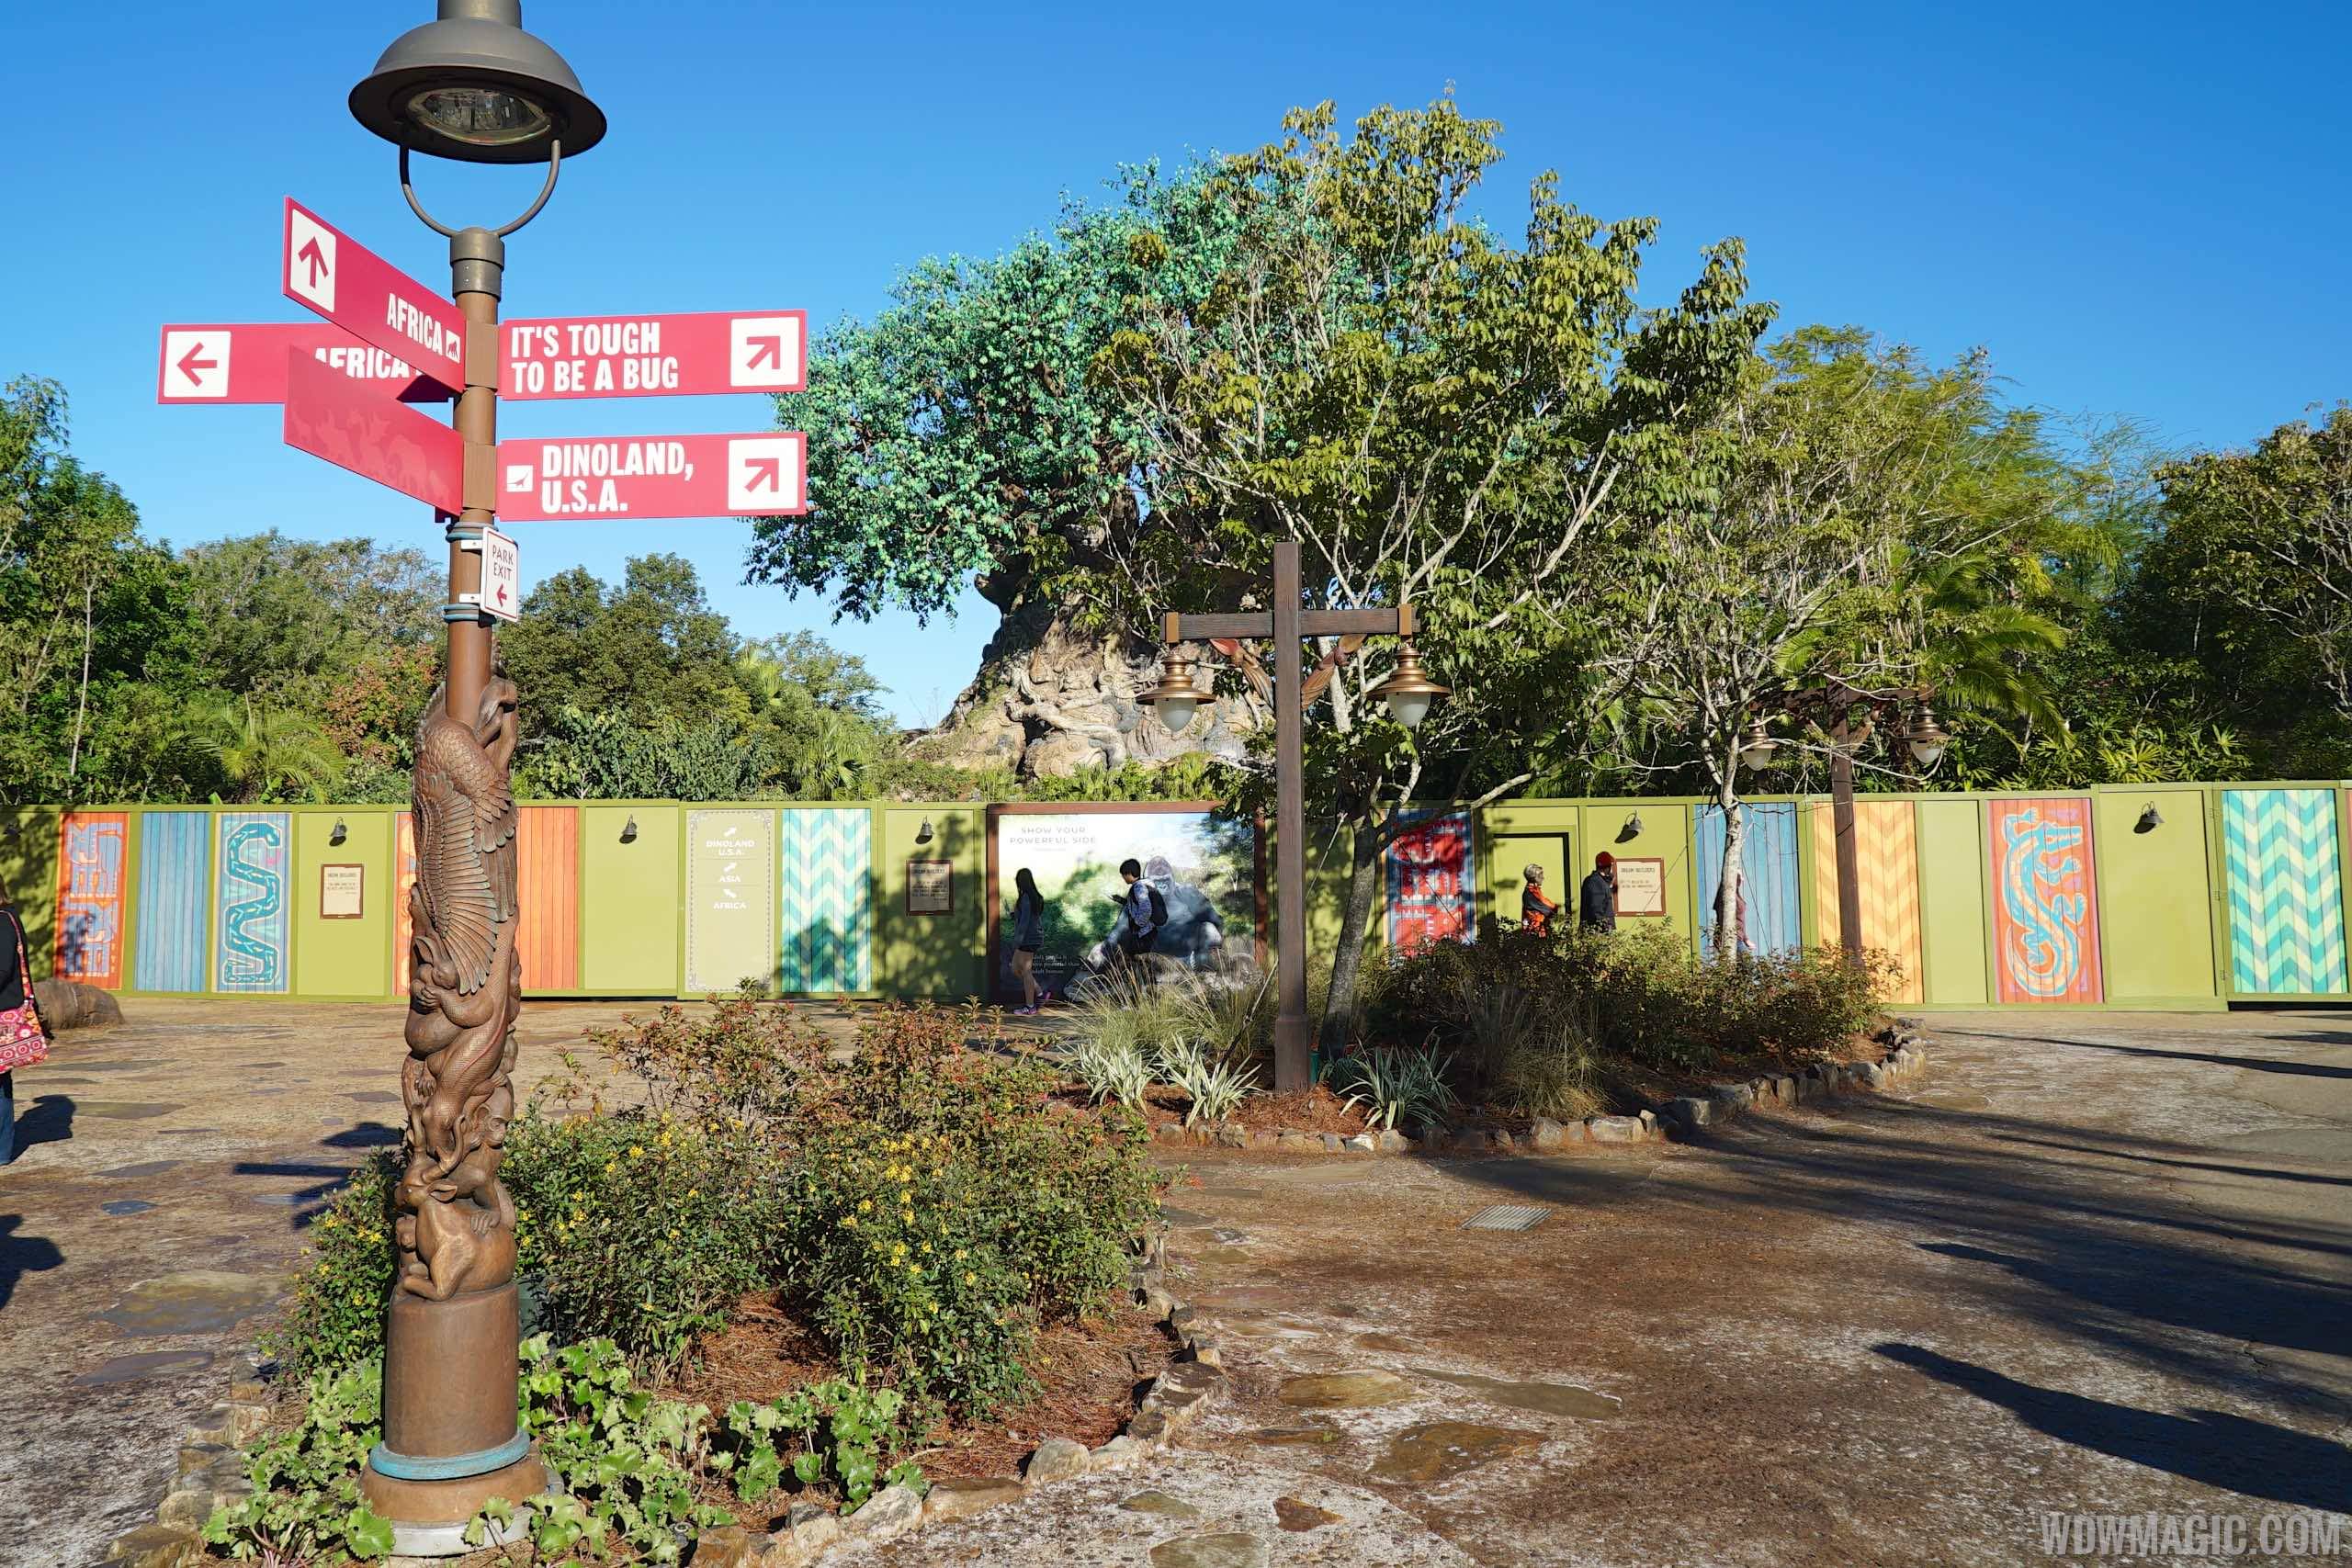 PHOTOS - Expanded area in-front of the Tree of Life opens at Disney's Animal Kingdom 